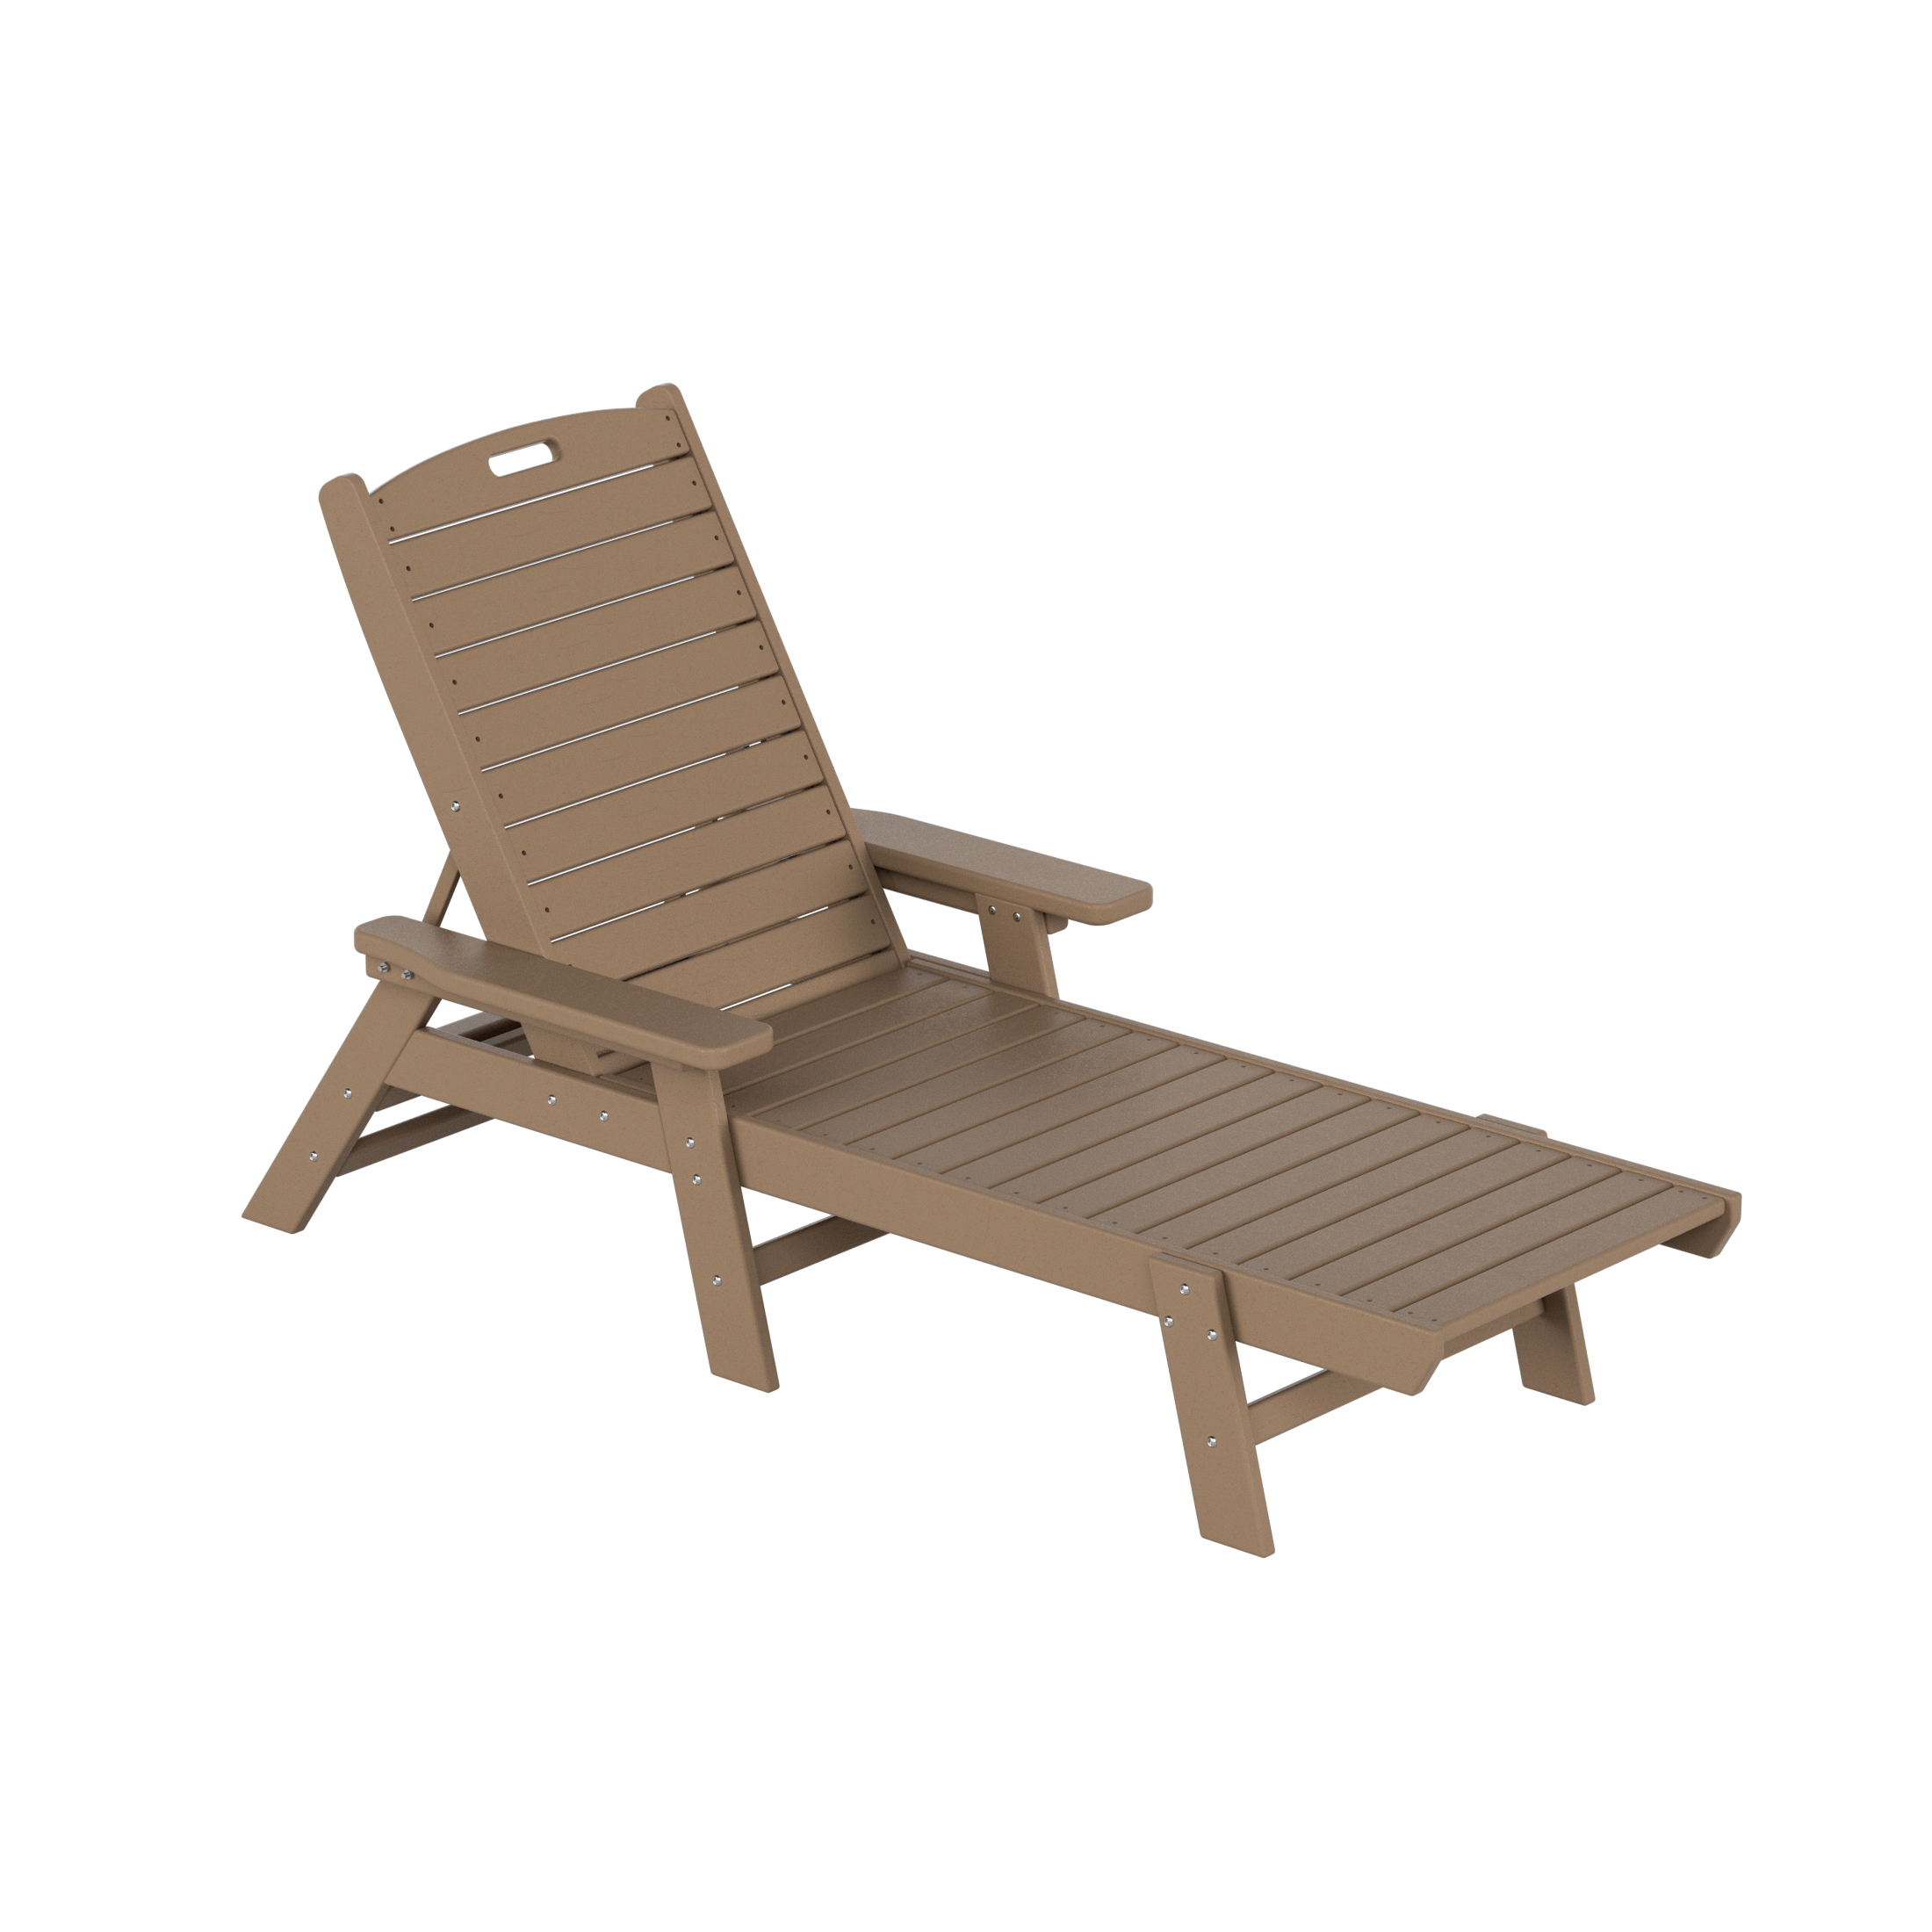 GARDEN Set of 2 Patio Outdoor Chaise Lounge Chair, Weathered Wood - image 3 of 8